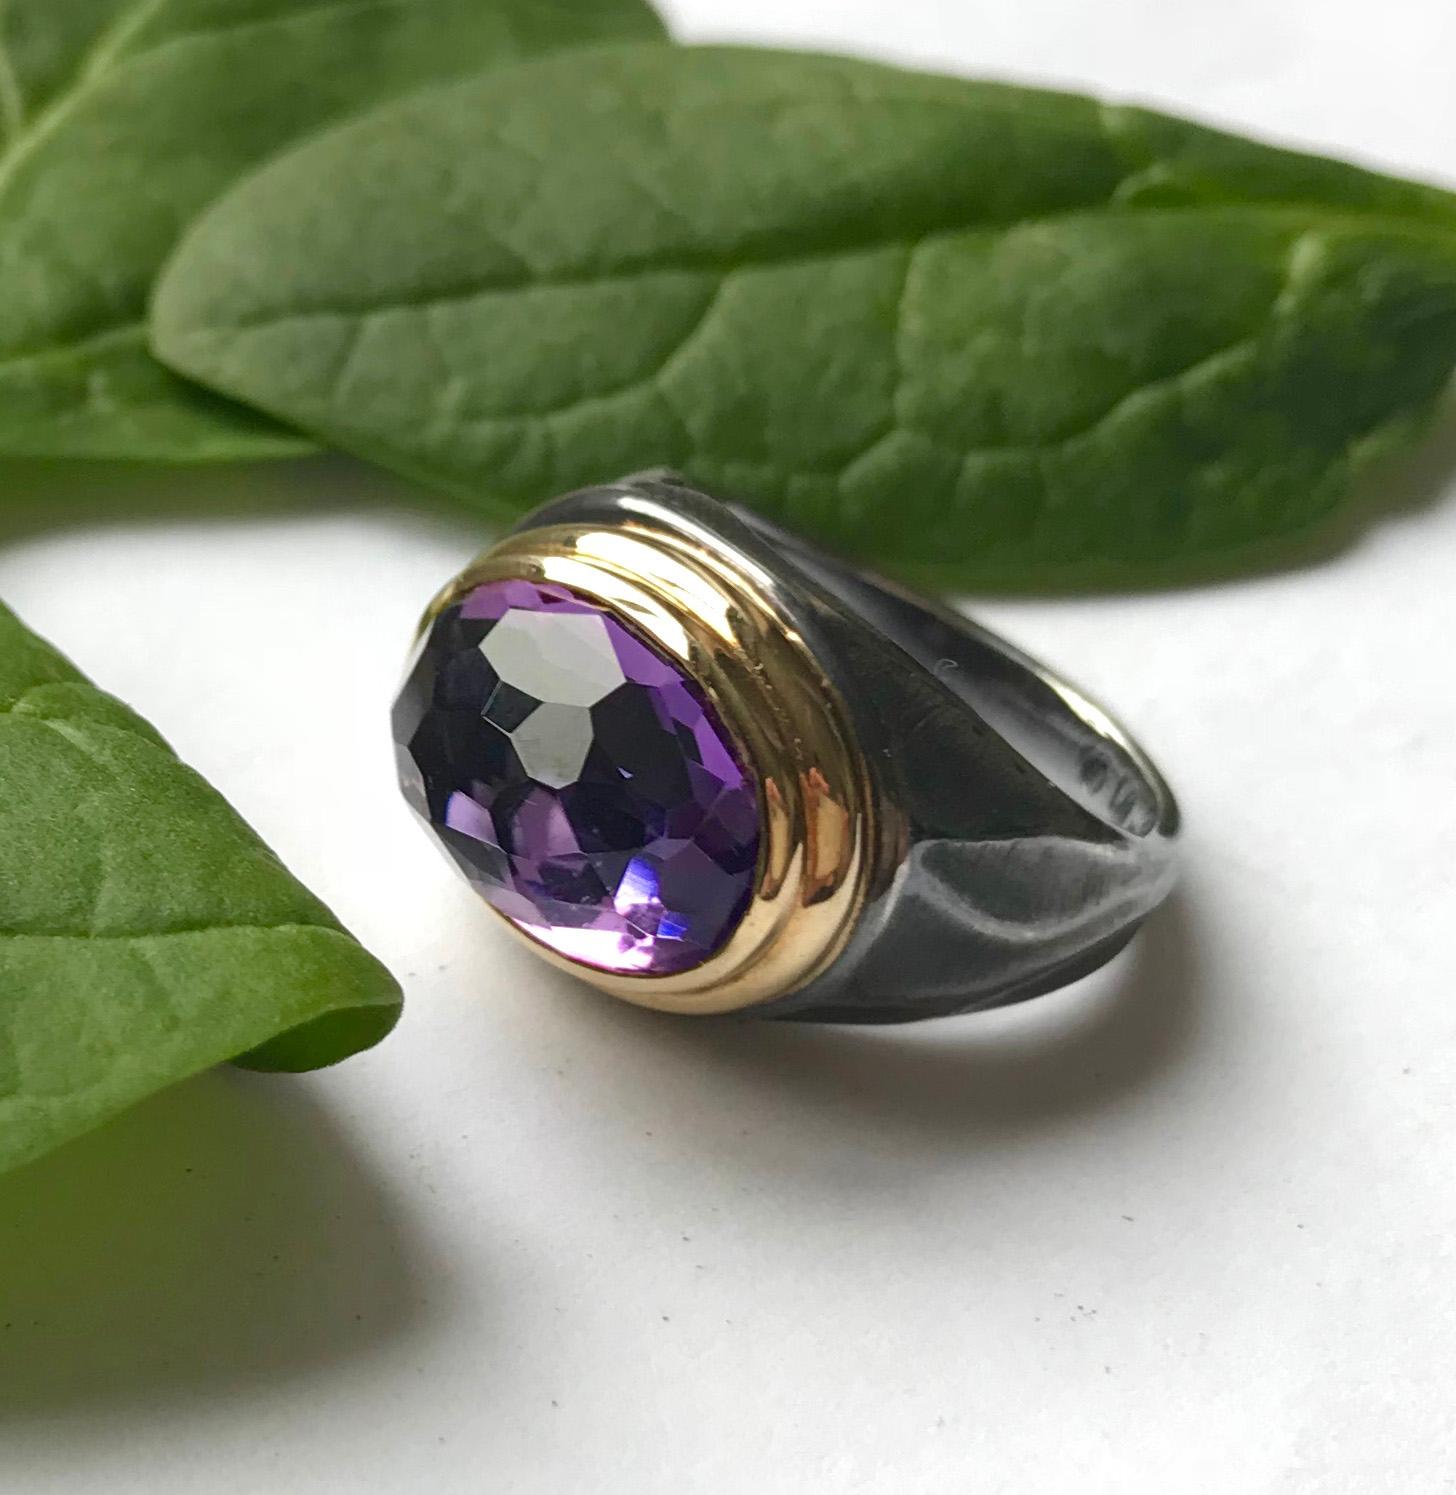 K.Mita’s Gem Rock Ring features a rounded 5.84ct amethyst that bursts out of an 18k yellow gold rim and rests on top of an oxidized sterling silver shank transformed by K.Mita’s signature “dune” texture. The texture creates an illusion of movement